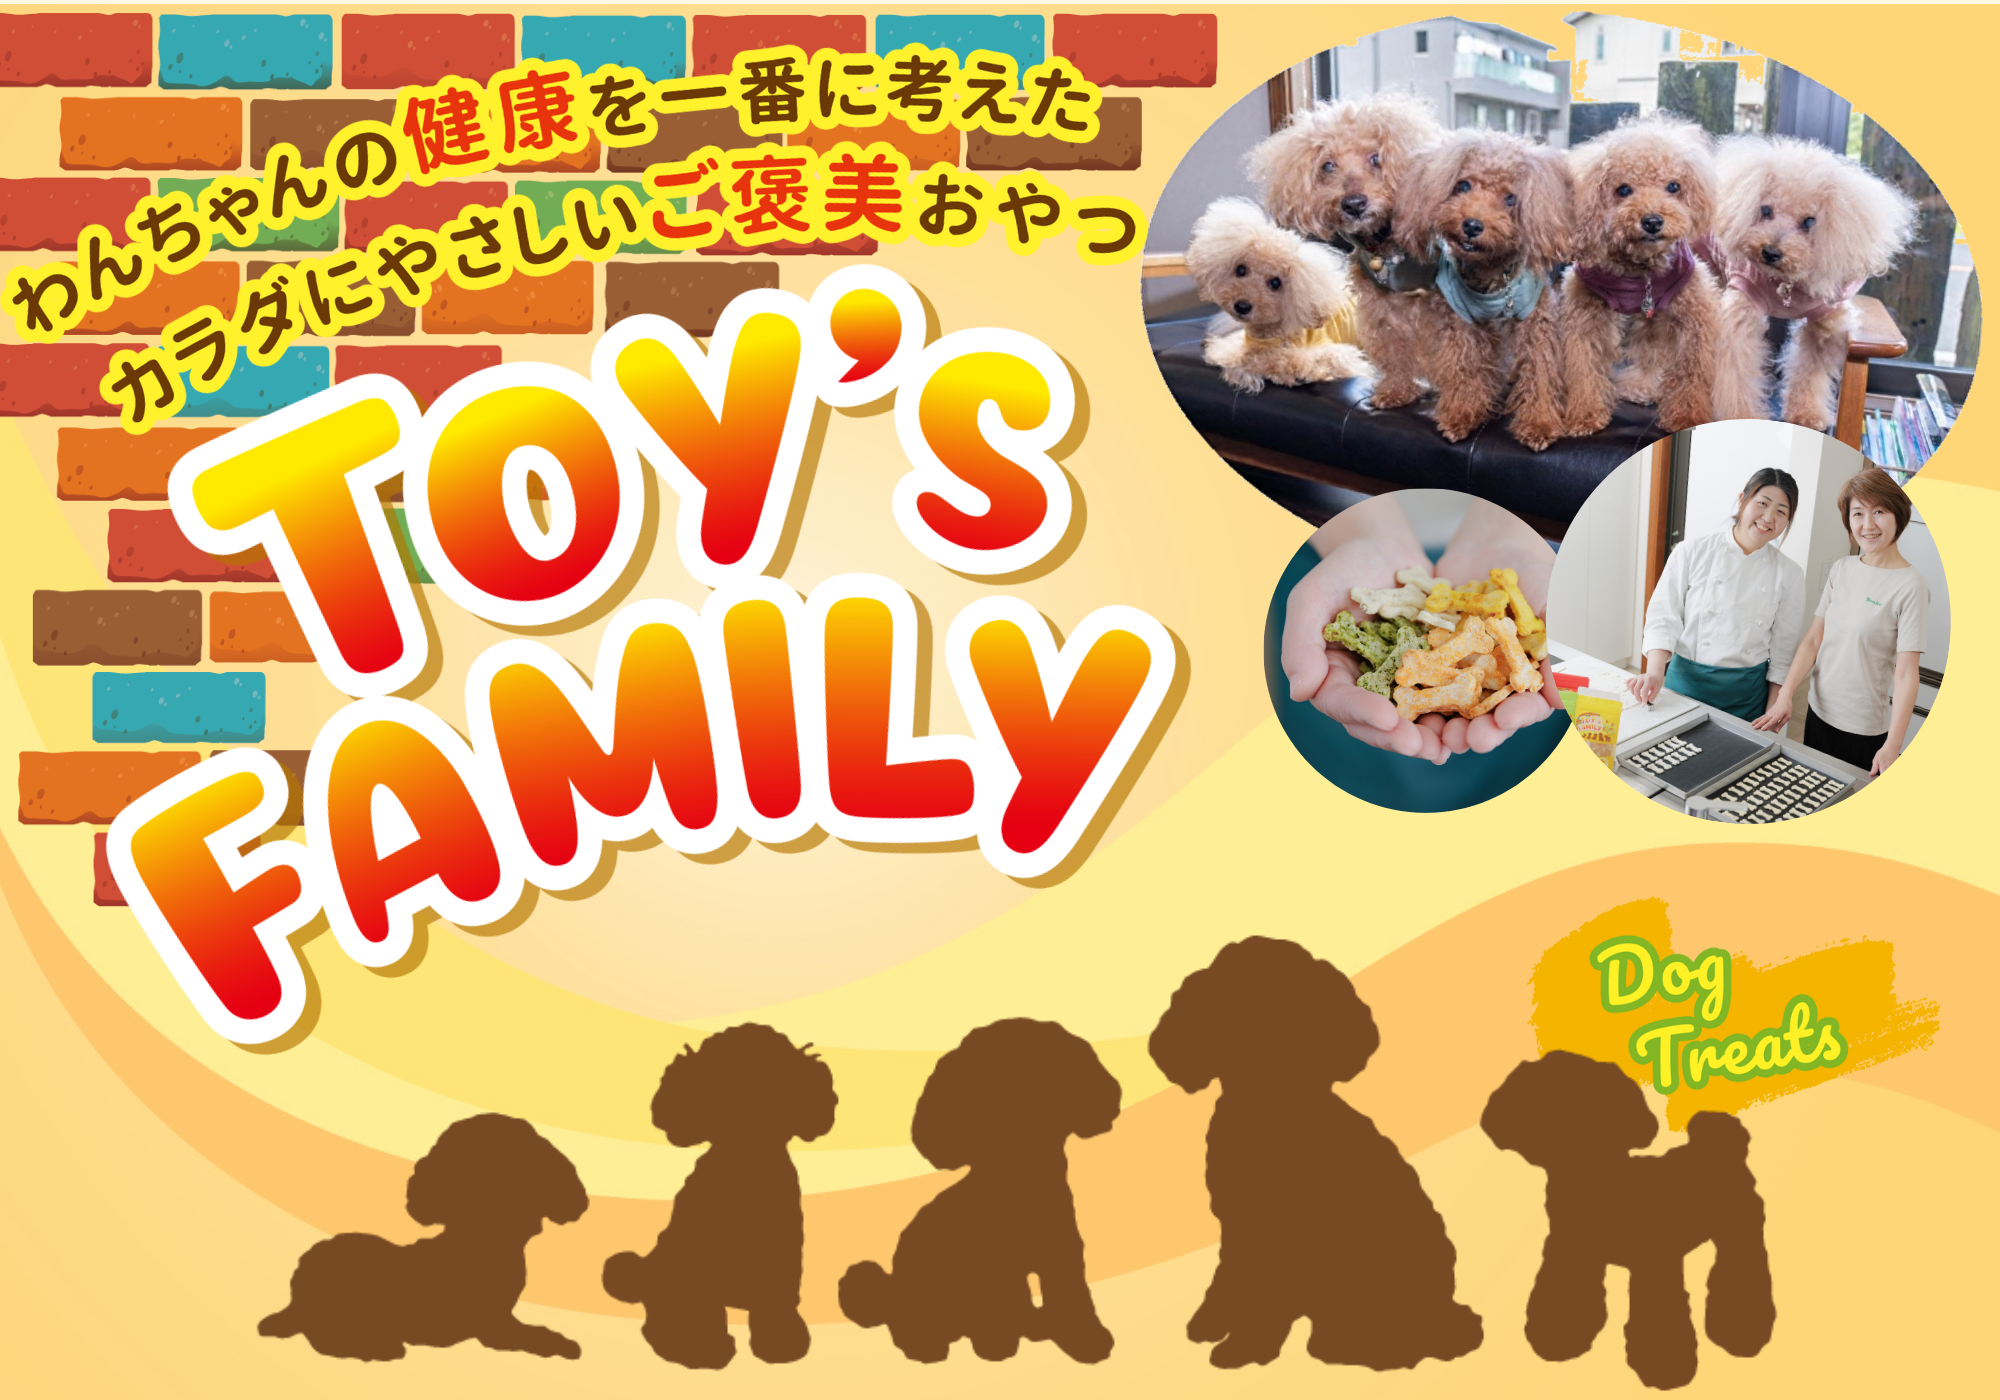 Toy"sFamily